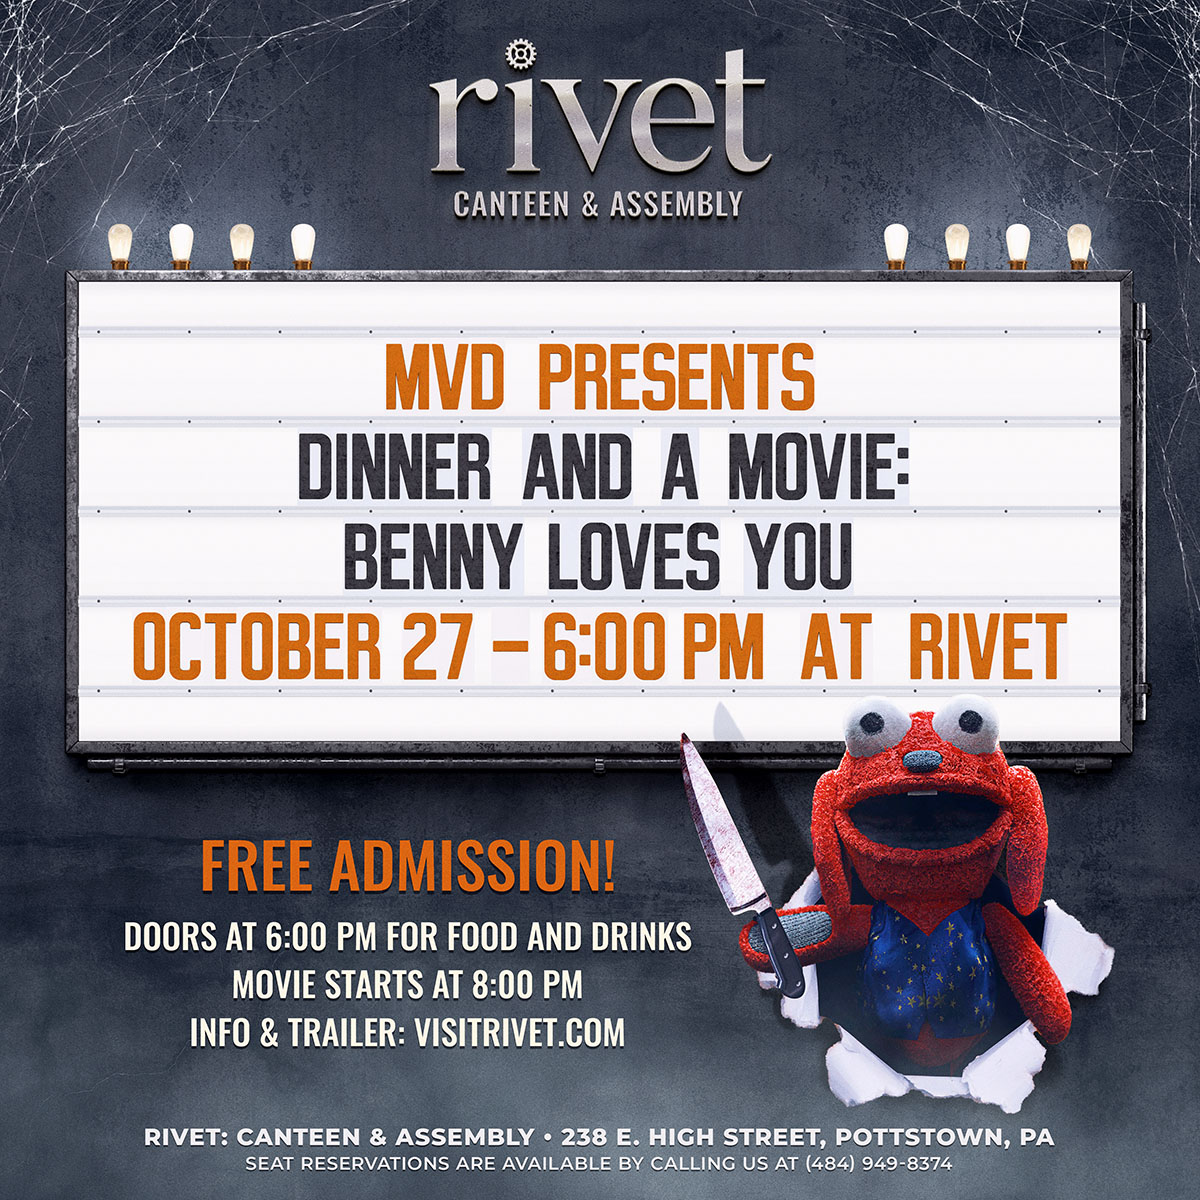 MVD Presents the cult classic movie Benny Loves You at Rivet: Canteen & Assembly on October 27th starting at 6:00 PM.